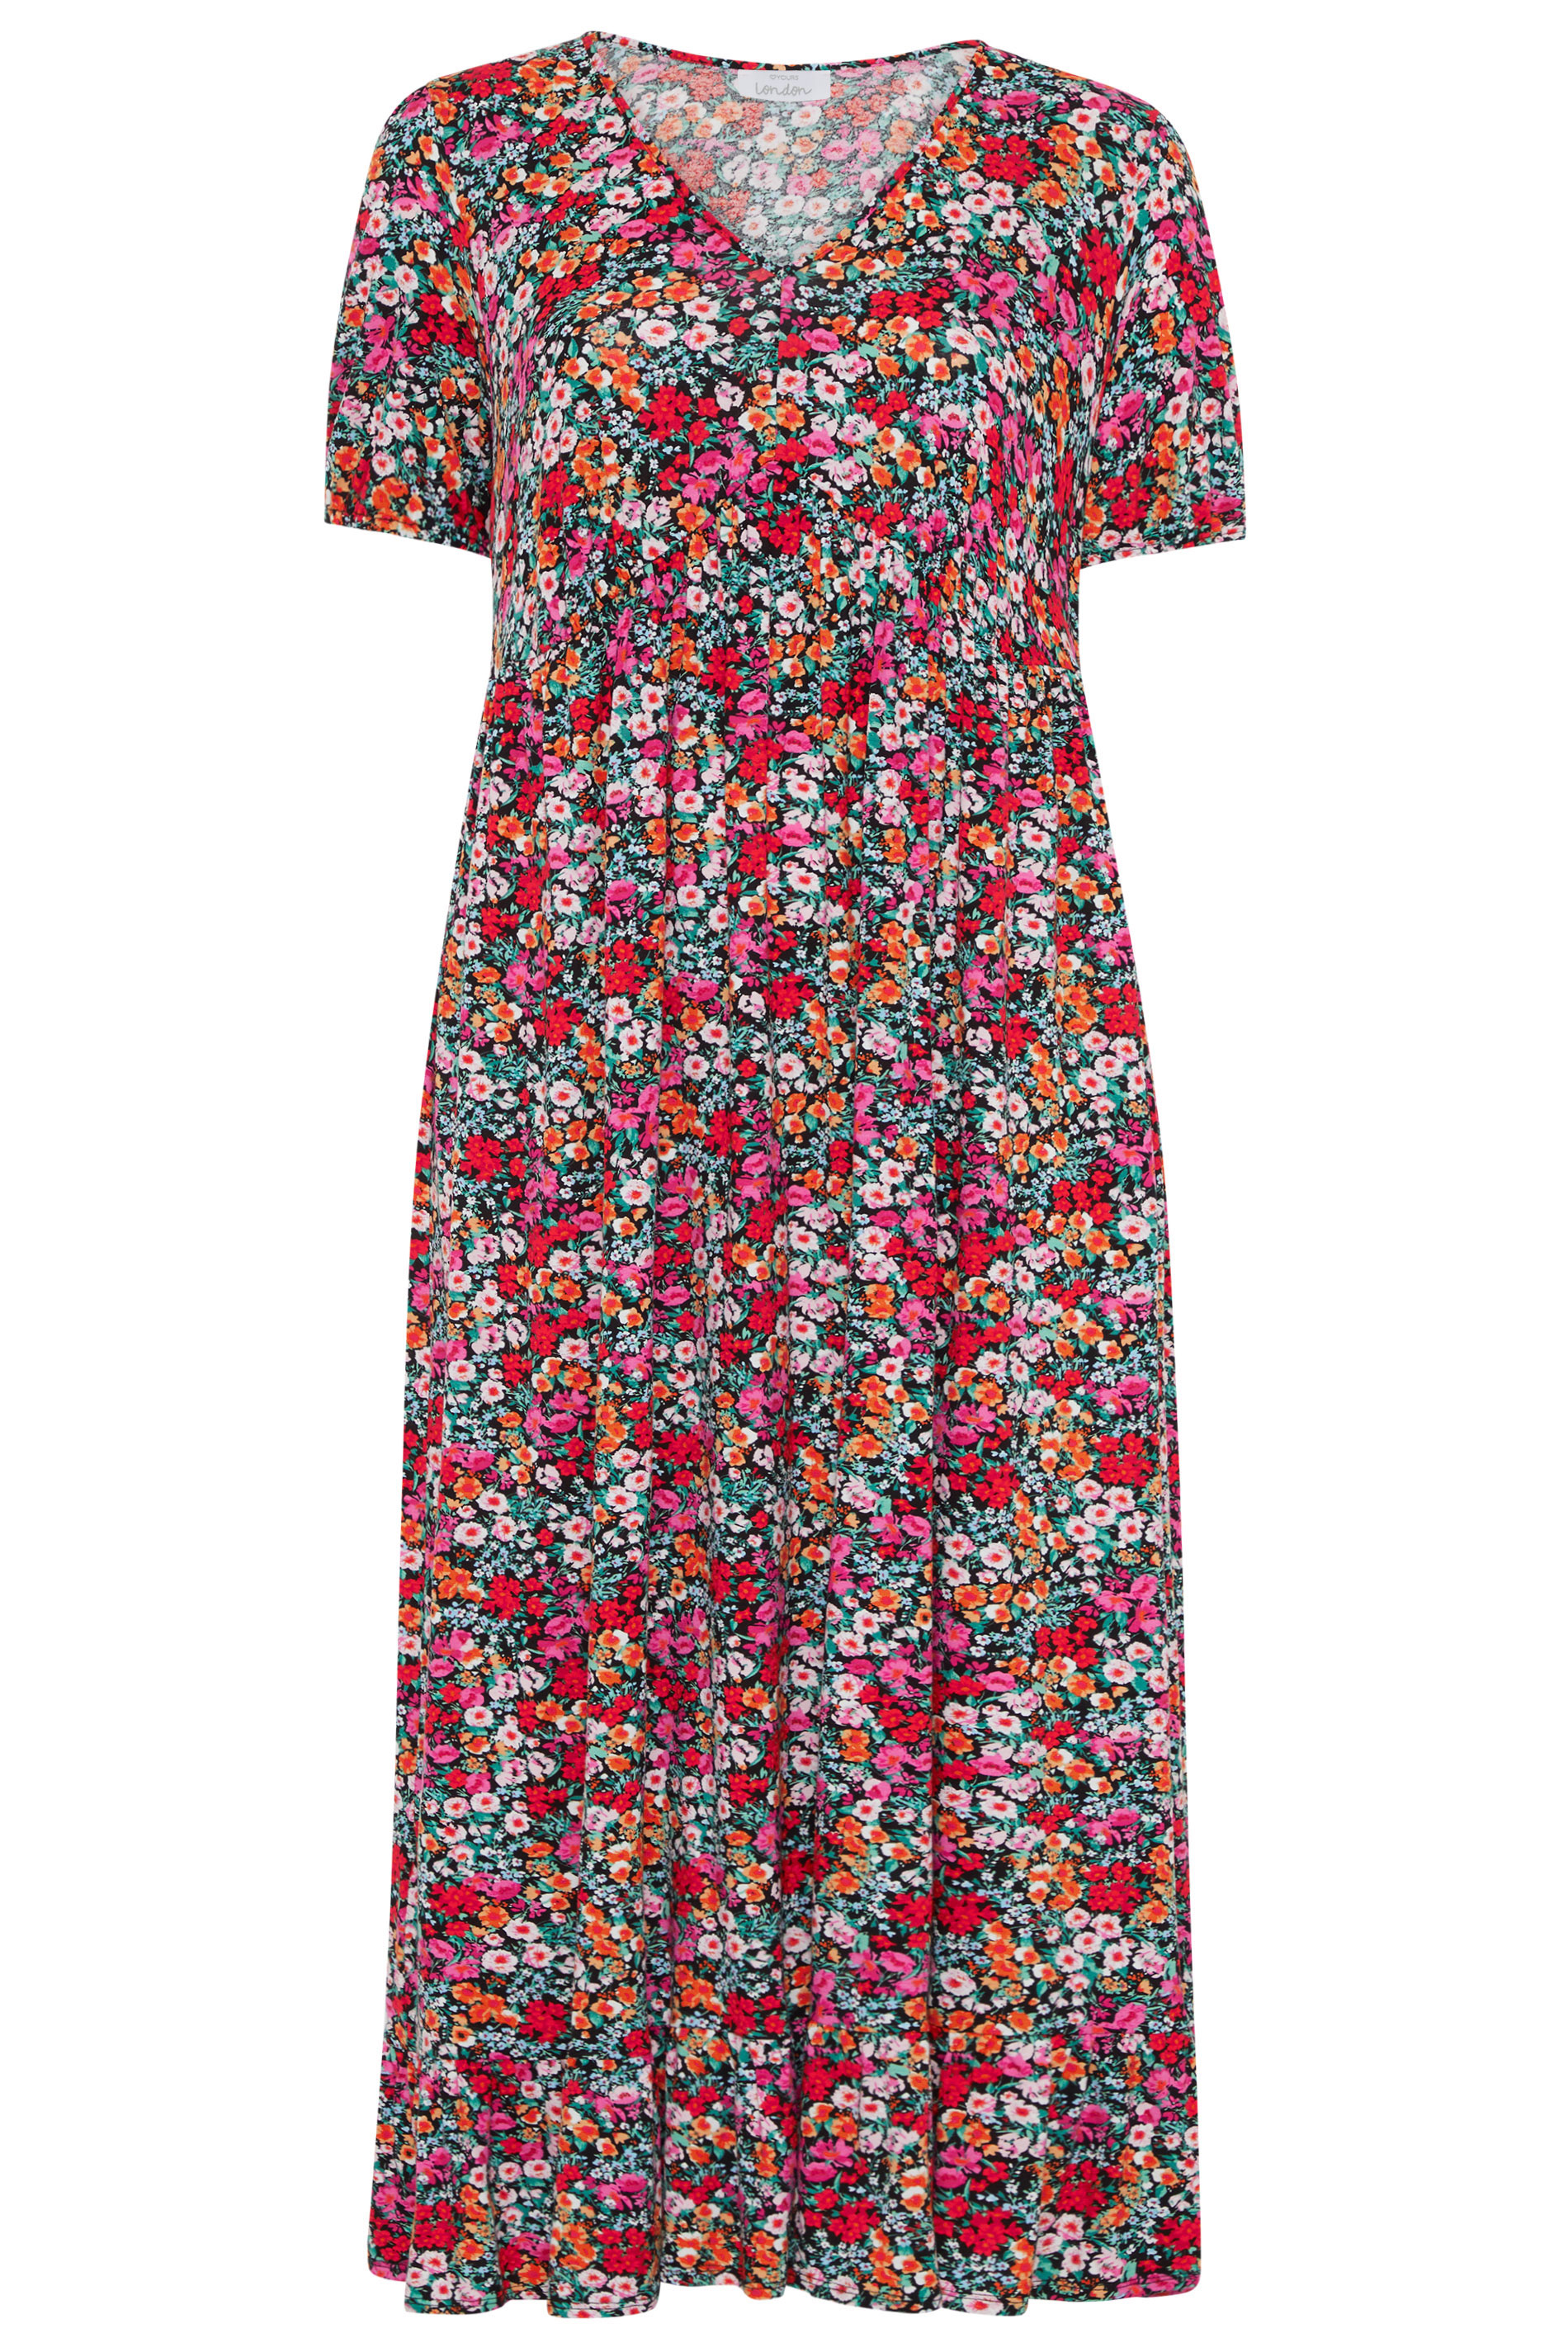 YOURS LONDON Multicoloured Floral V-Neck Frill Hem Maxi Dress | Yours ...